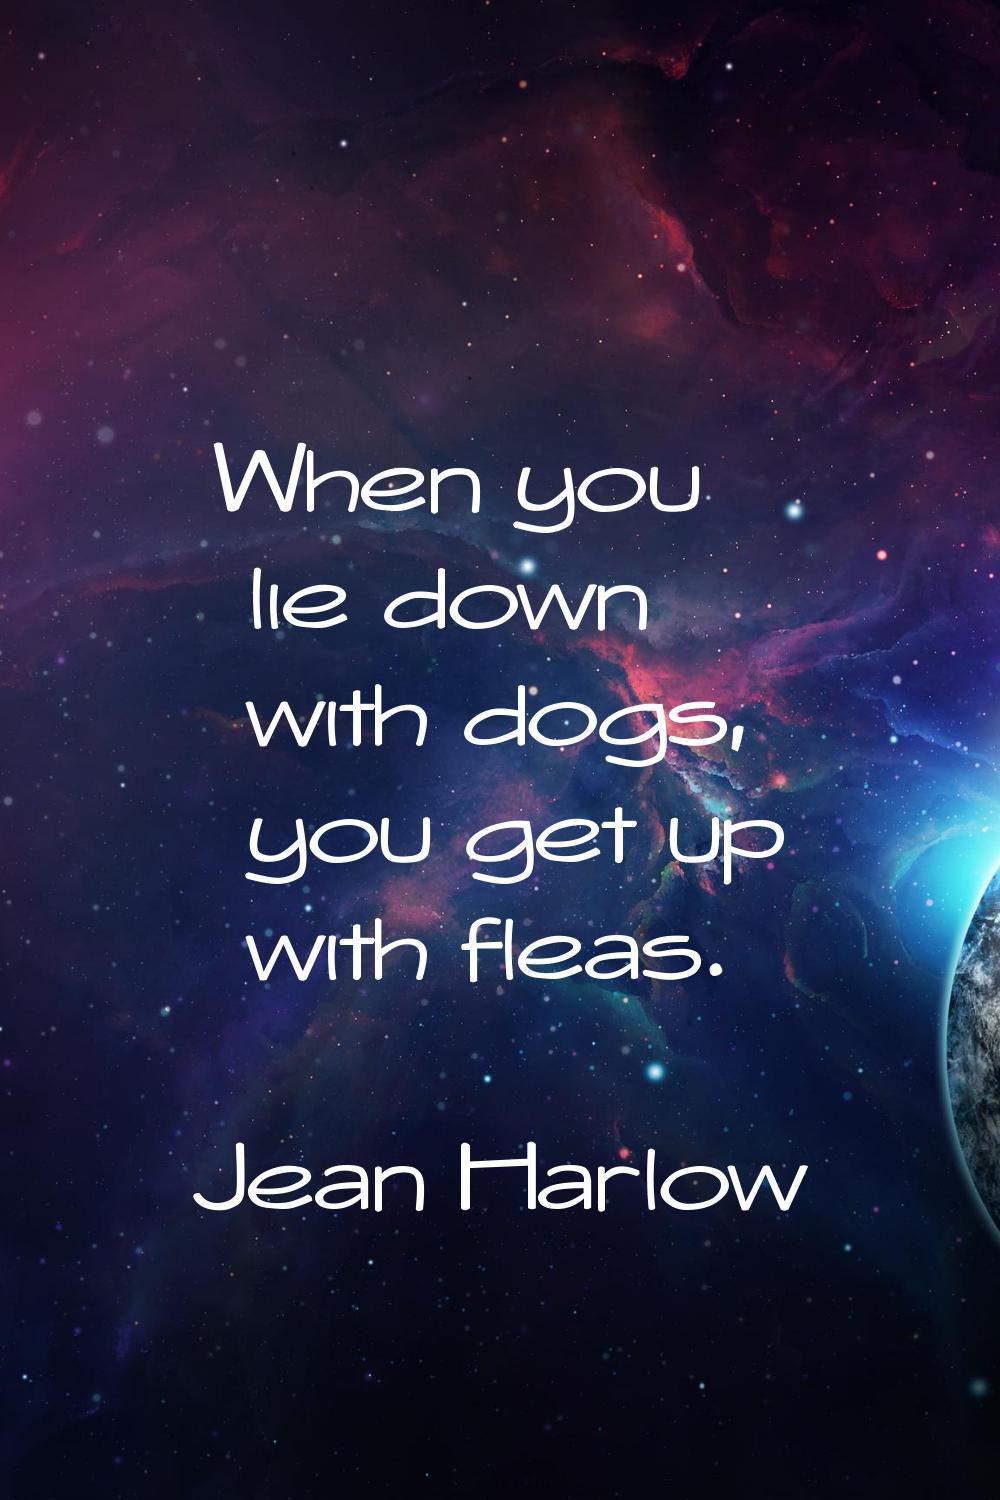 When you lie down with dogs, you get up with fleas.